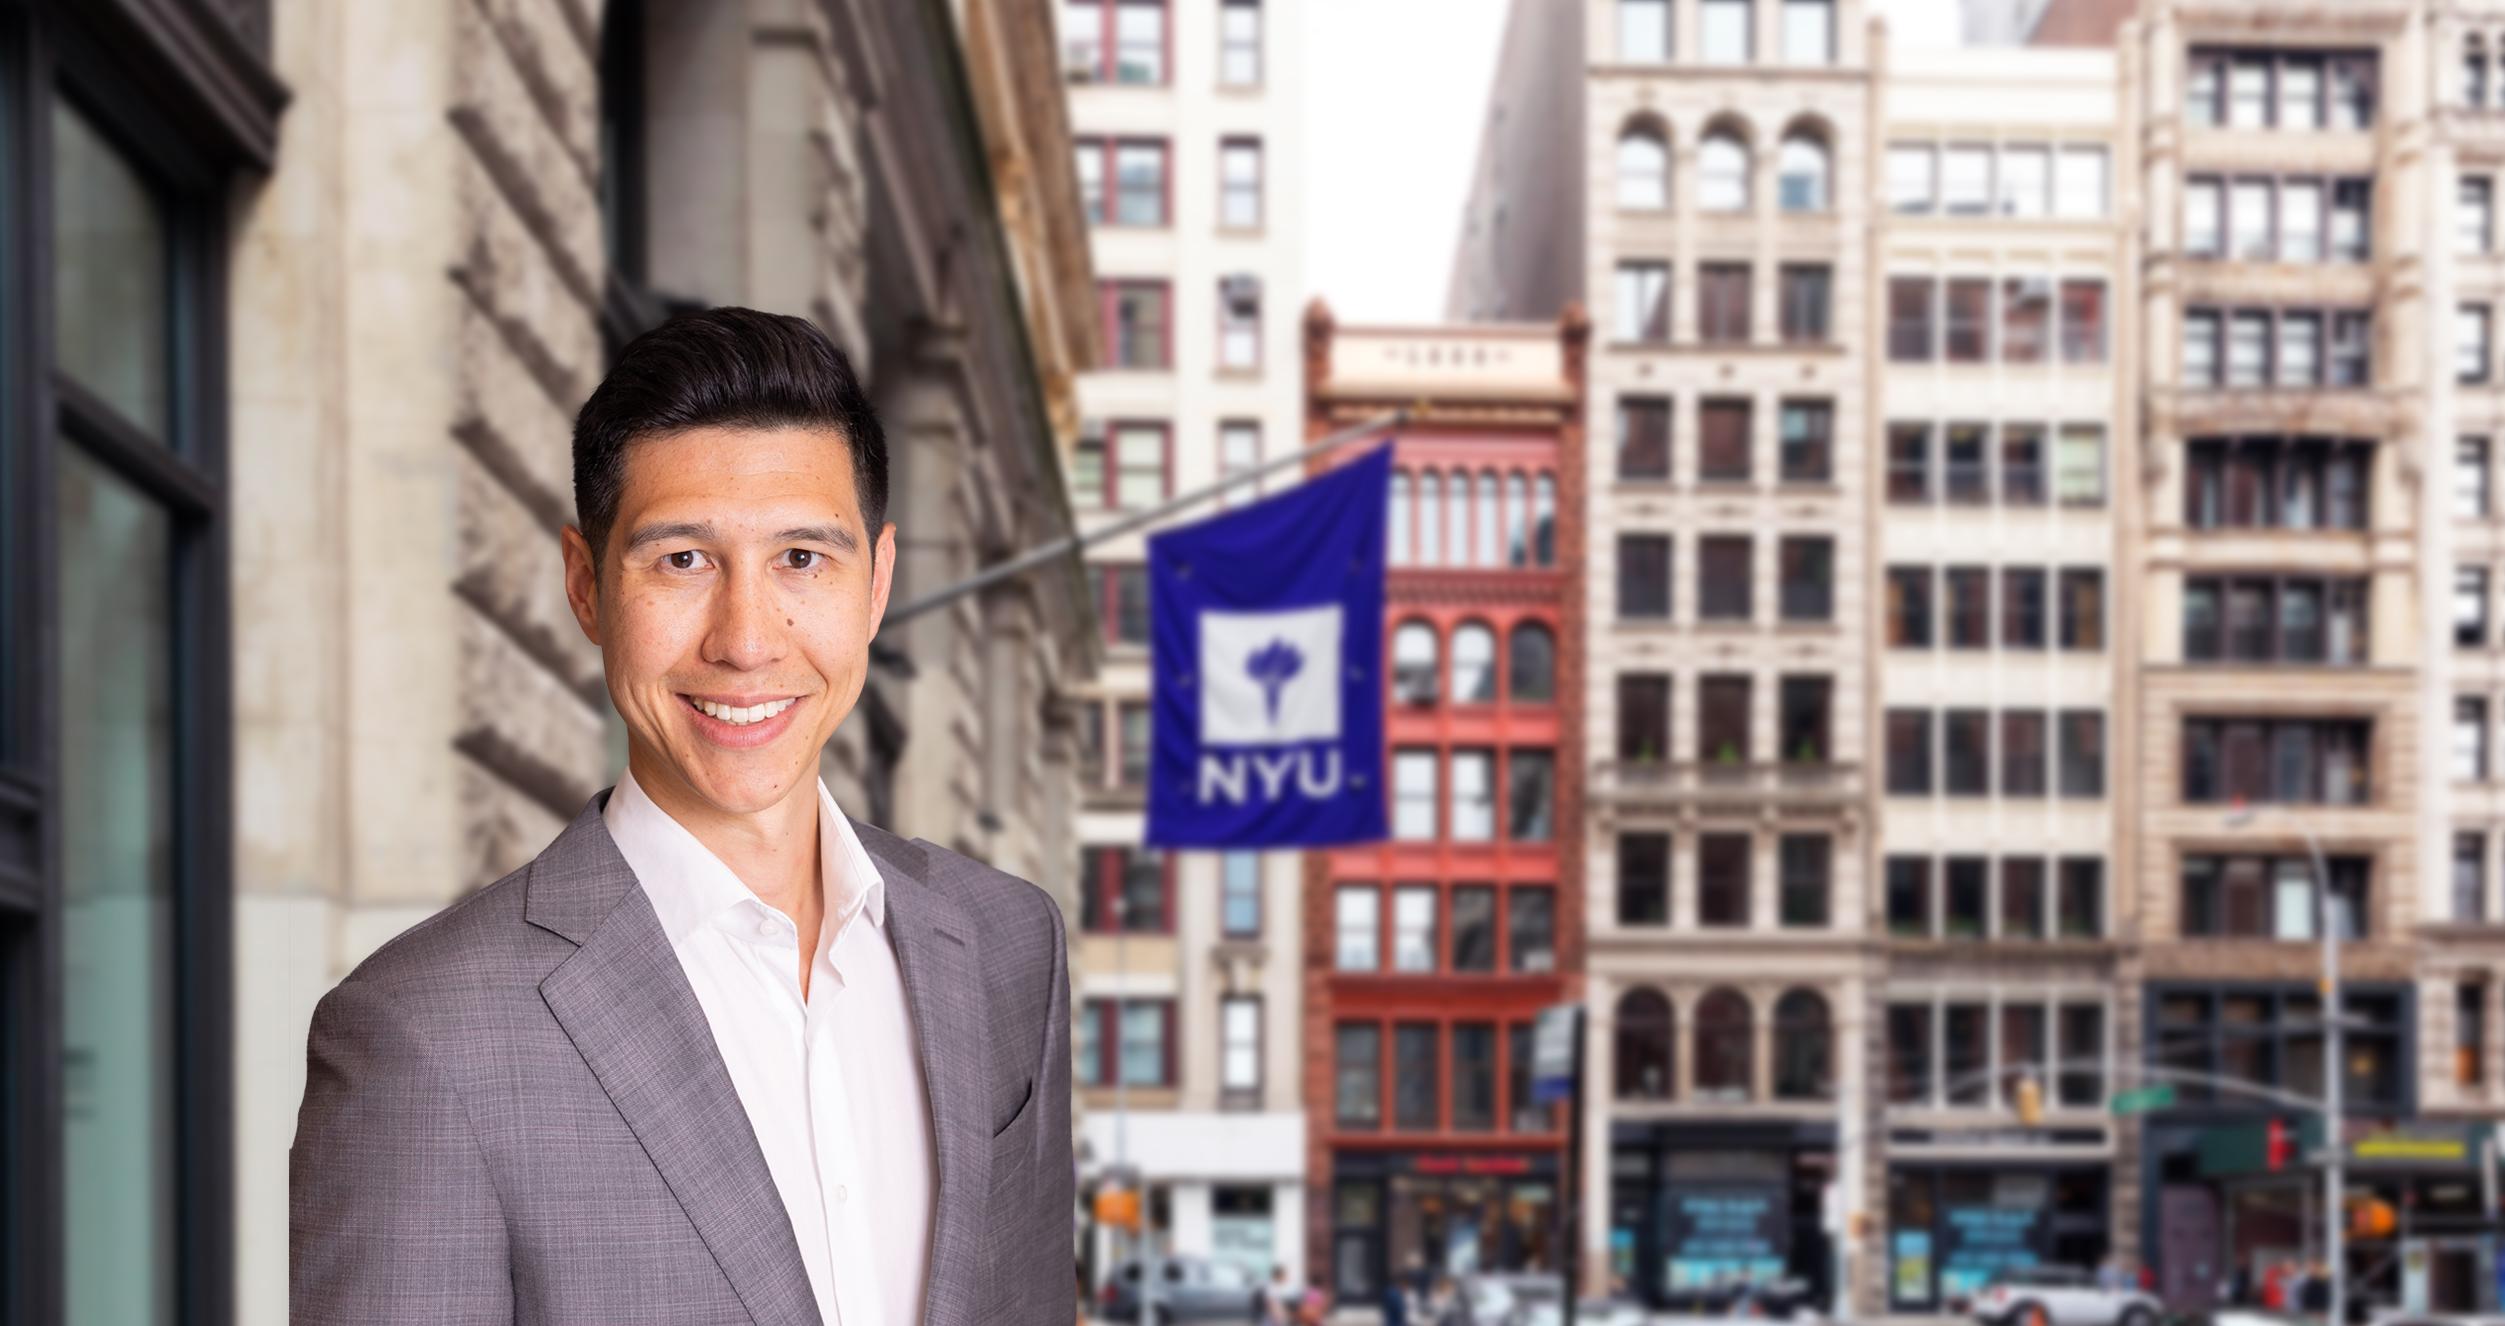 Male student in a grey suit and a blurred background of a street view with a violet New York University flag